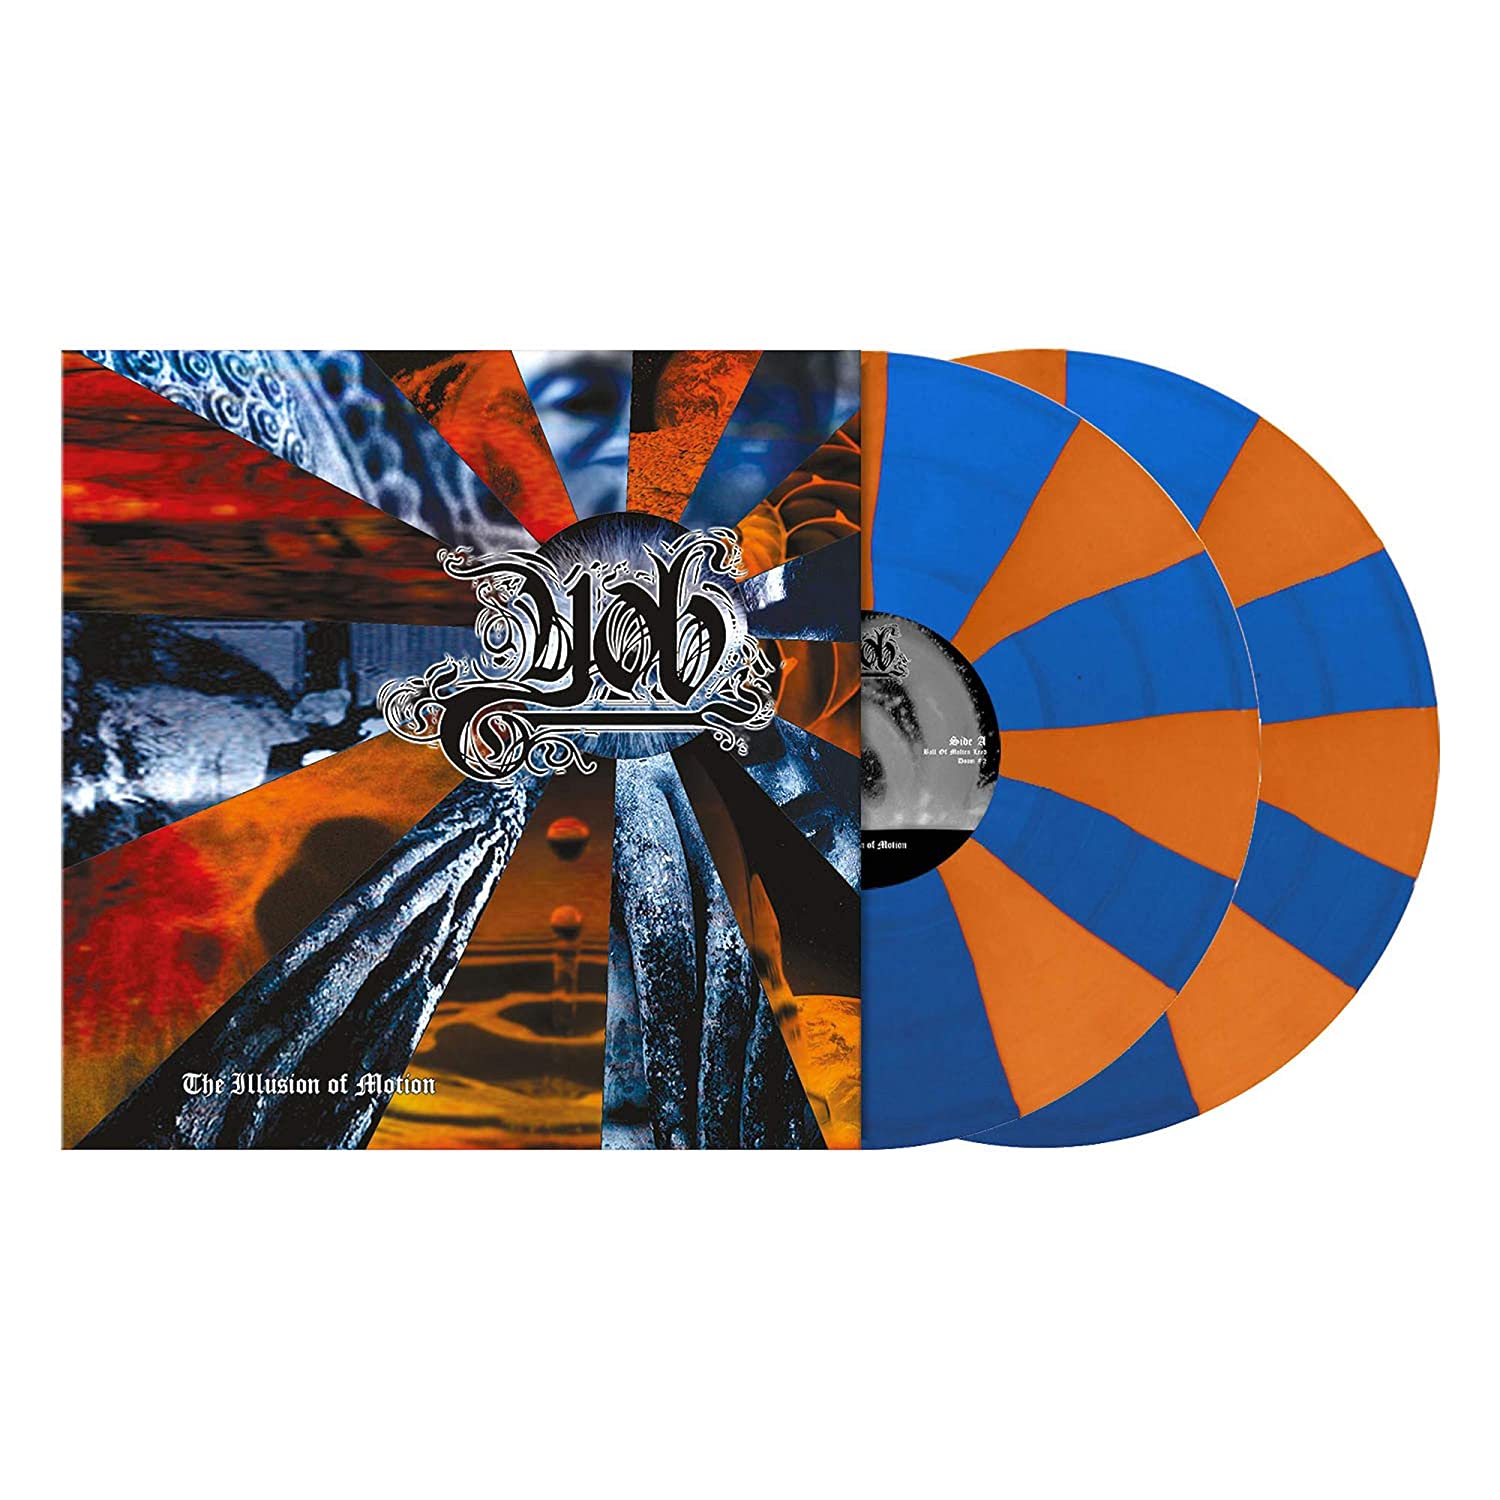 Yob - The Illusion Of Motion [Colored Vinyl]